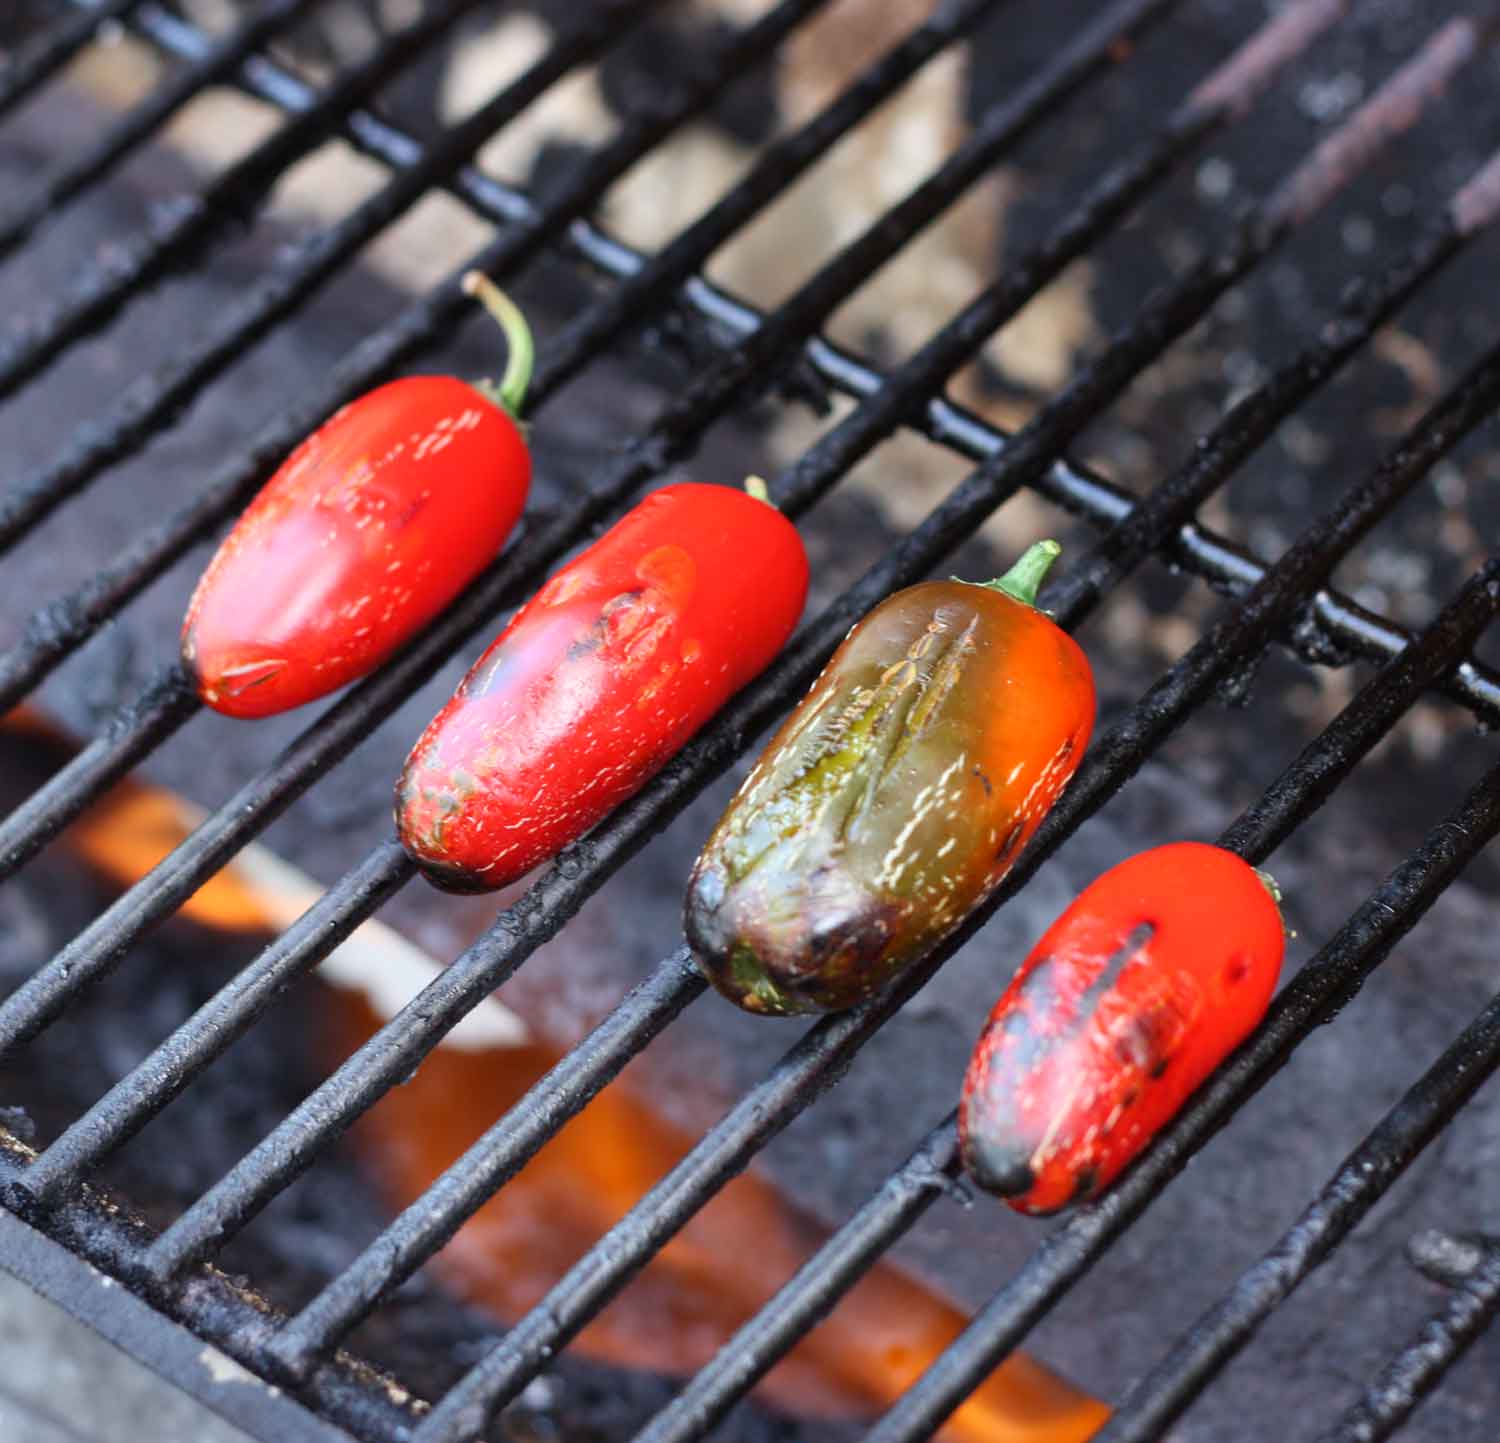 Jalapeno peppers roasting on the grill.